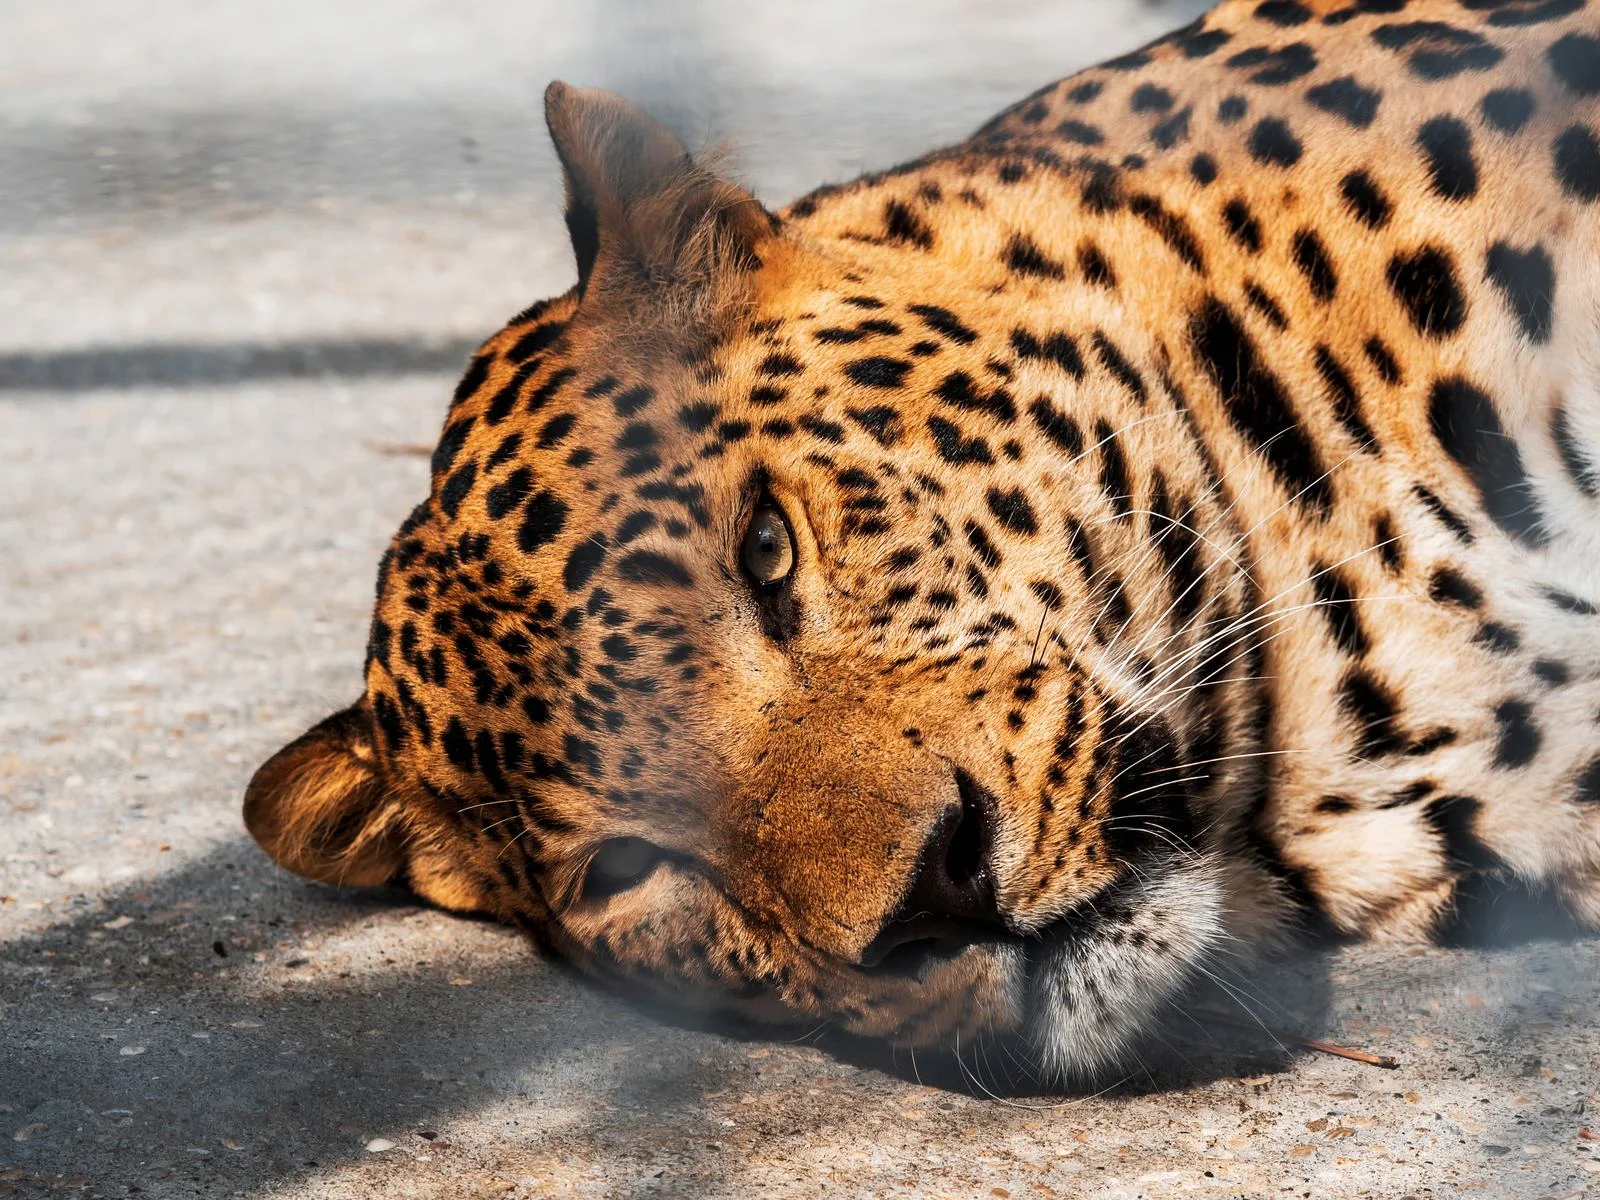 Observing a rescued Jaguar, one of the best things to do in Costa Rica, lying down with its head on the ground in a cage